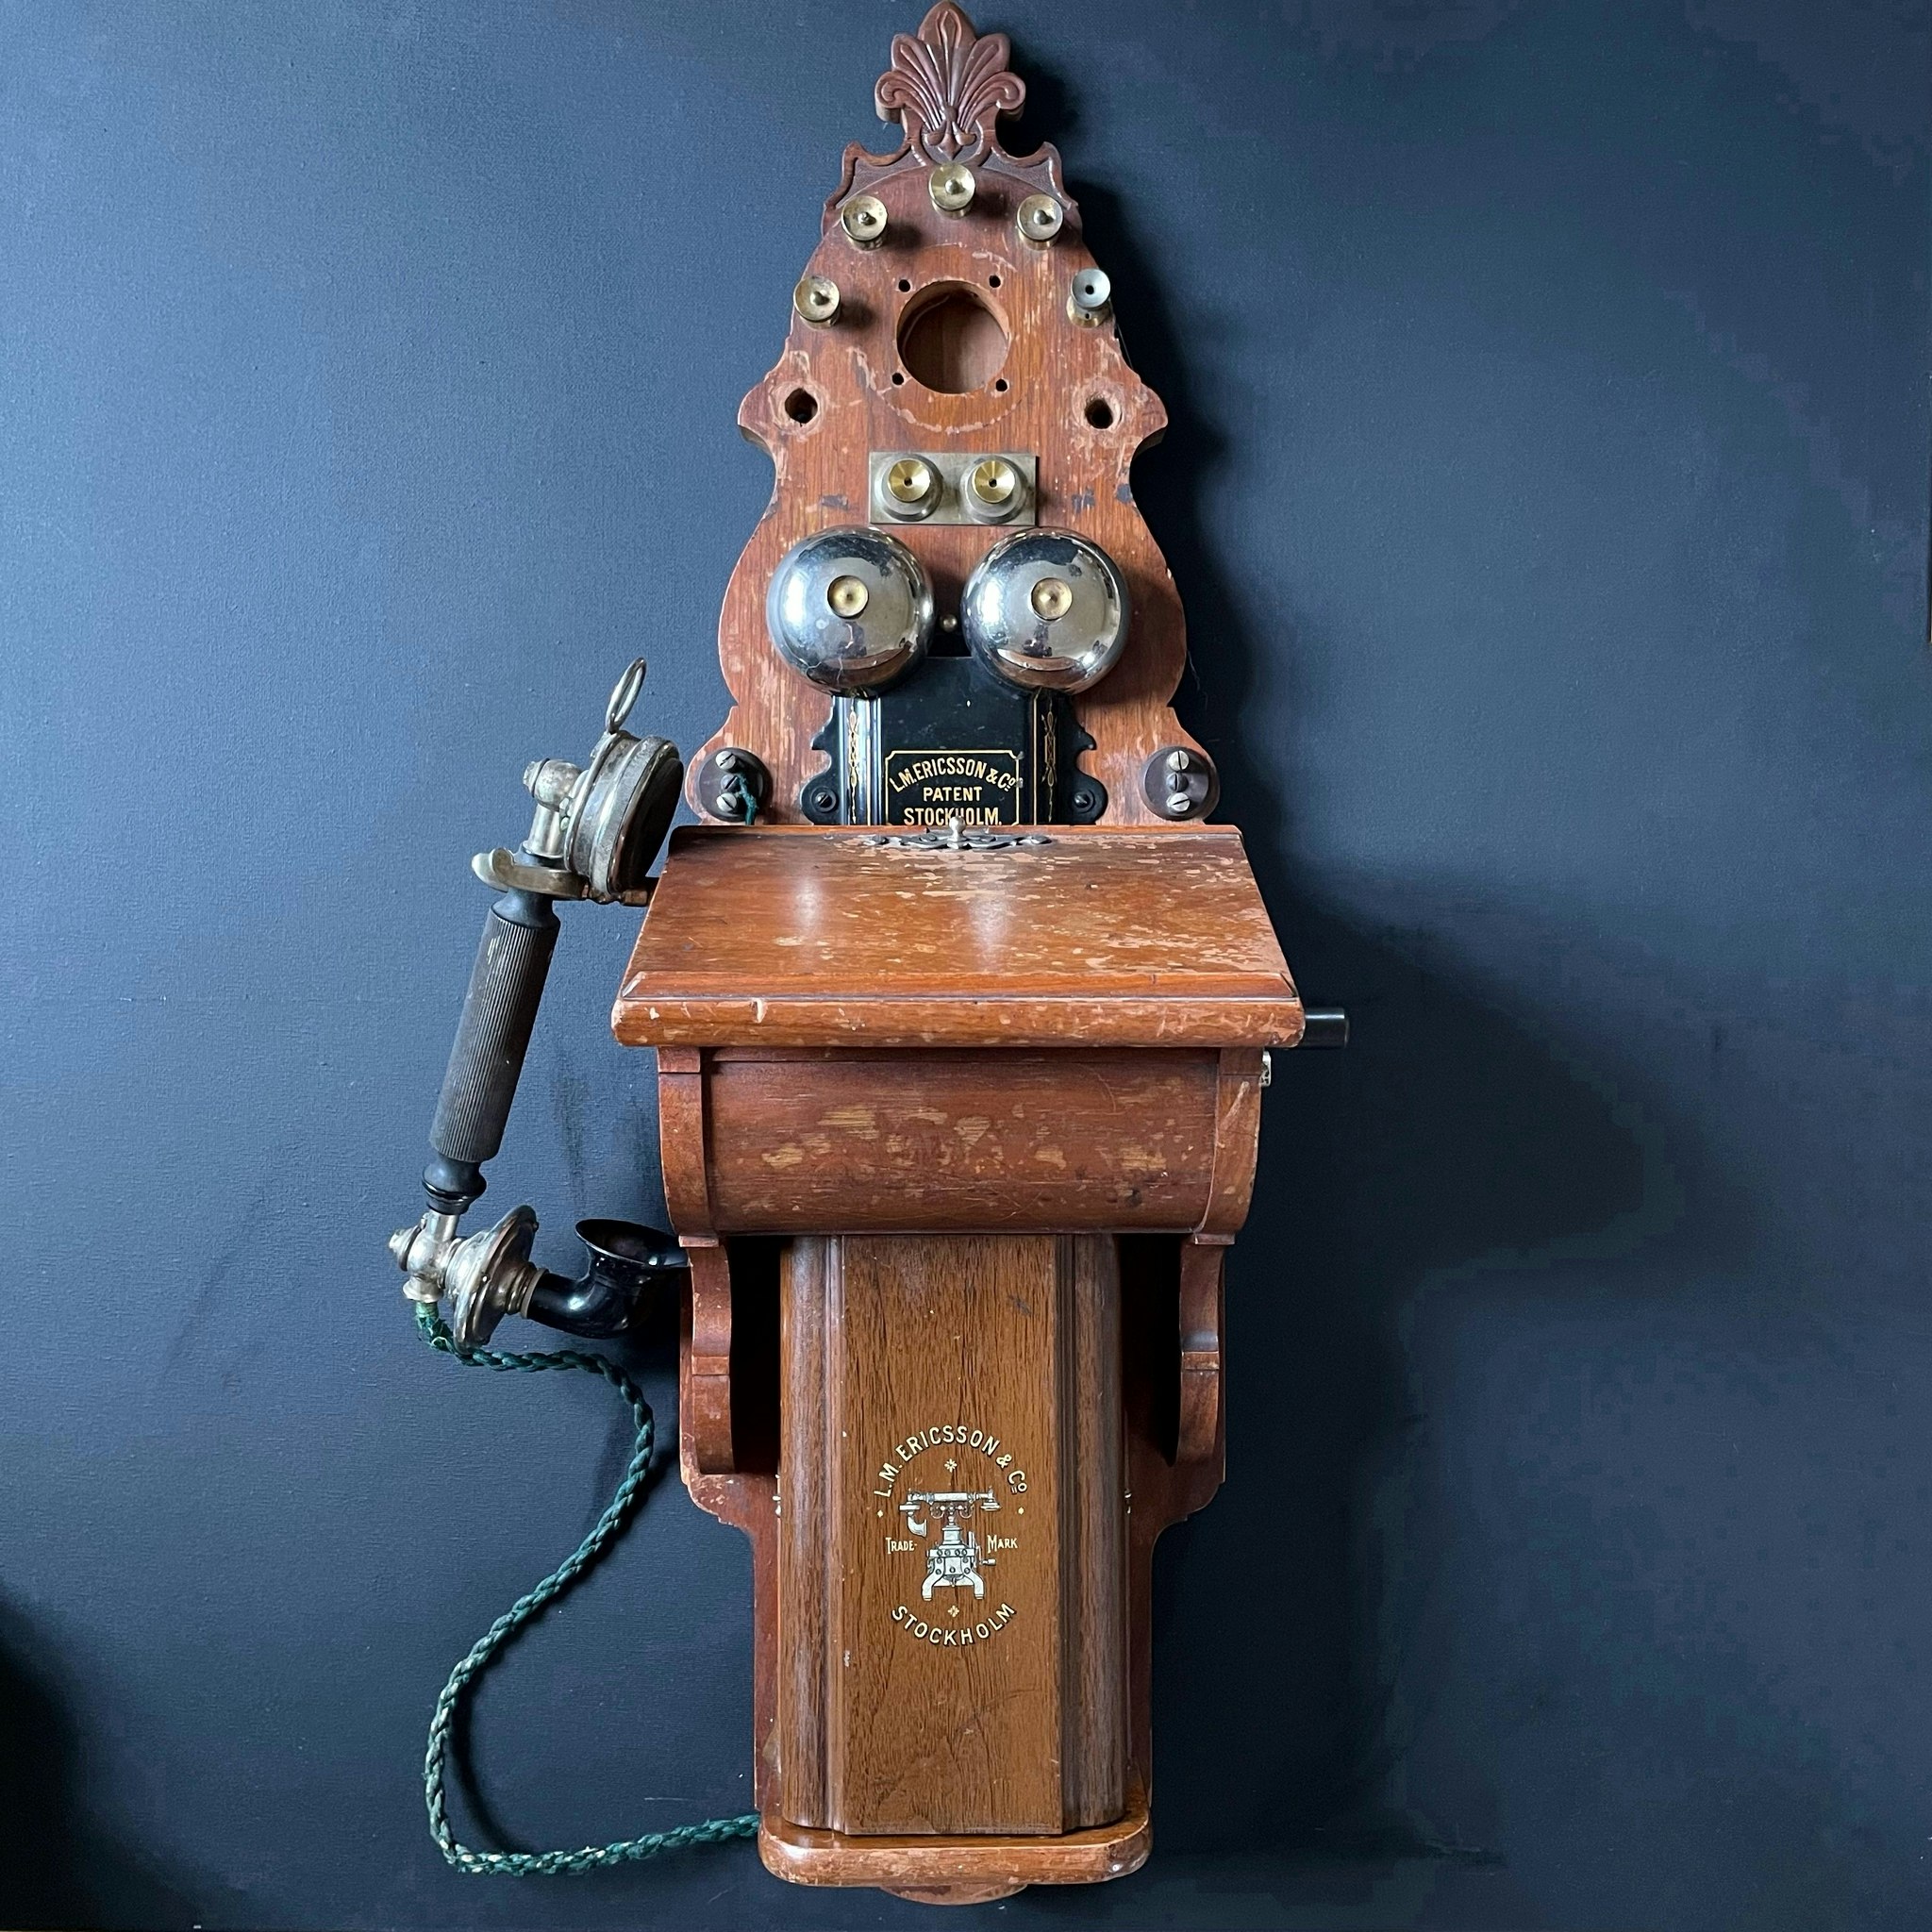 Ericsson Sweden Antique Wallhanged Telephone, Early 1900’s #1677